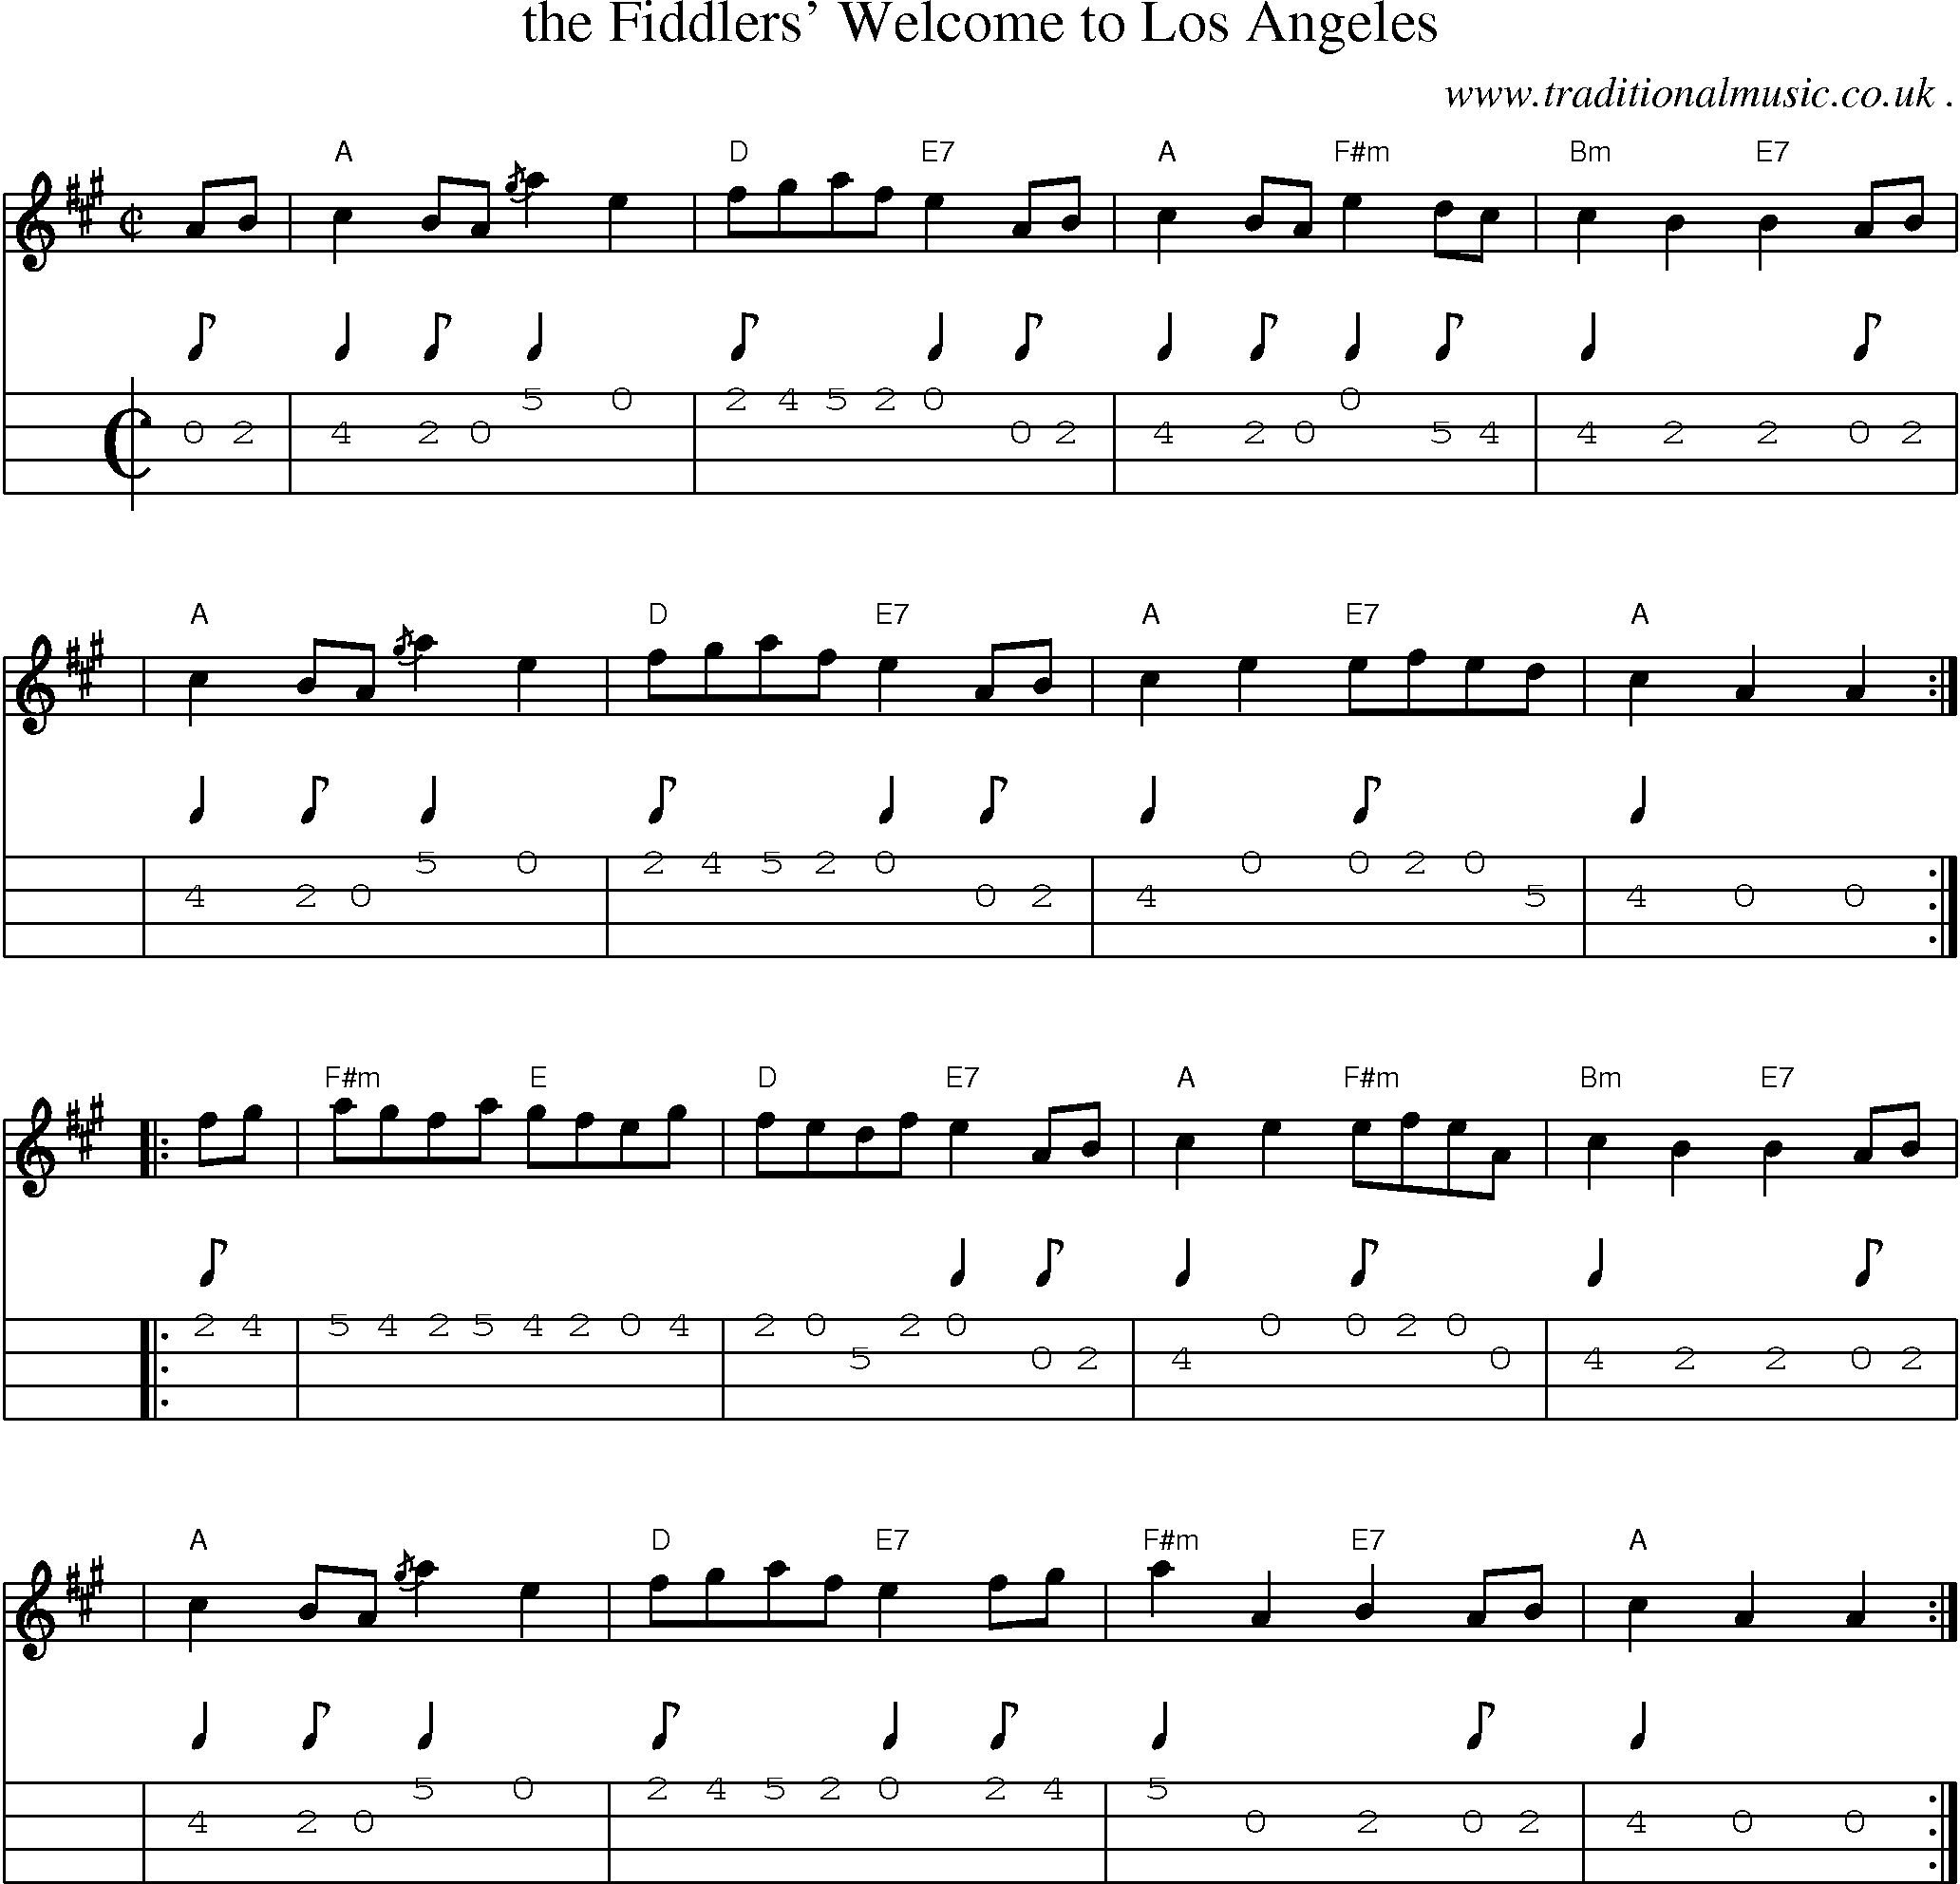 Sheet-music  score, Chords and Mandolin Tabs for The Fiddlers Welcome To Los Angeles